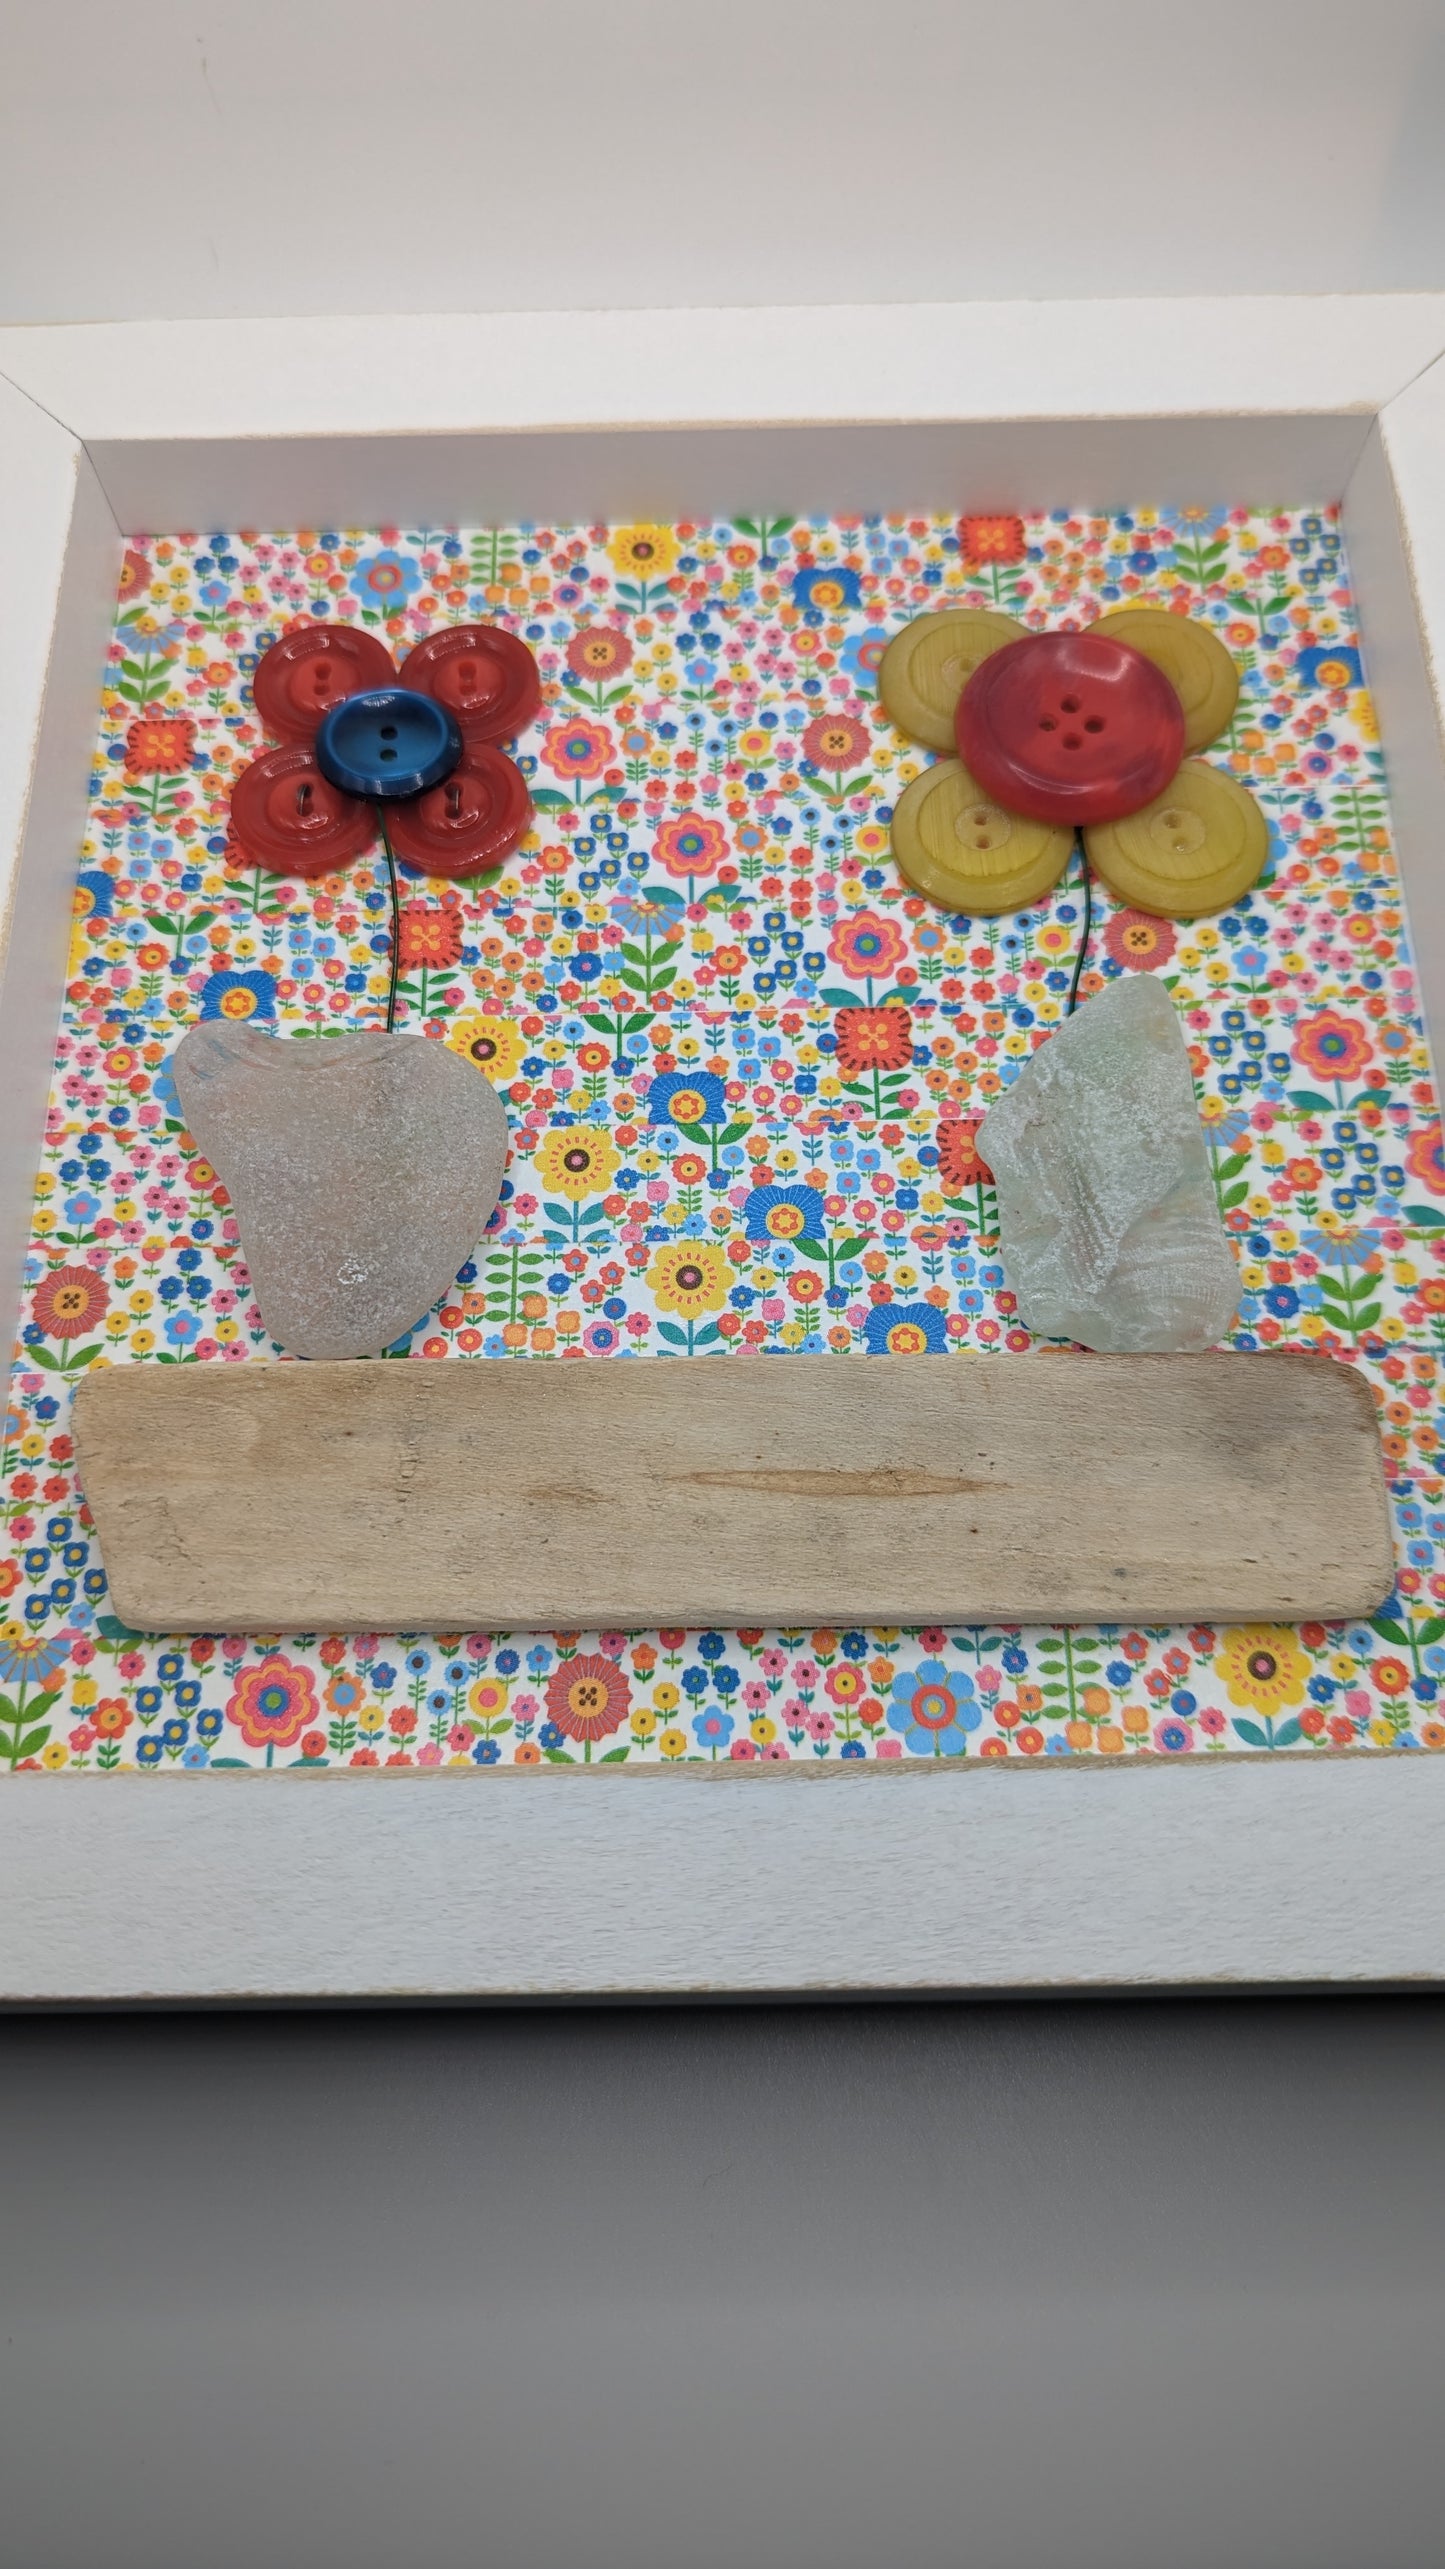 Mixed media framed flowers, vintage buttons, seaglass, driftwood and Washi Tape in 8 x 8 inch shadow box